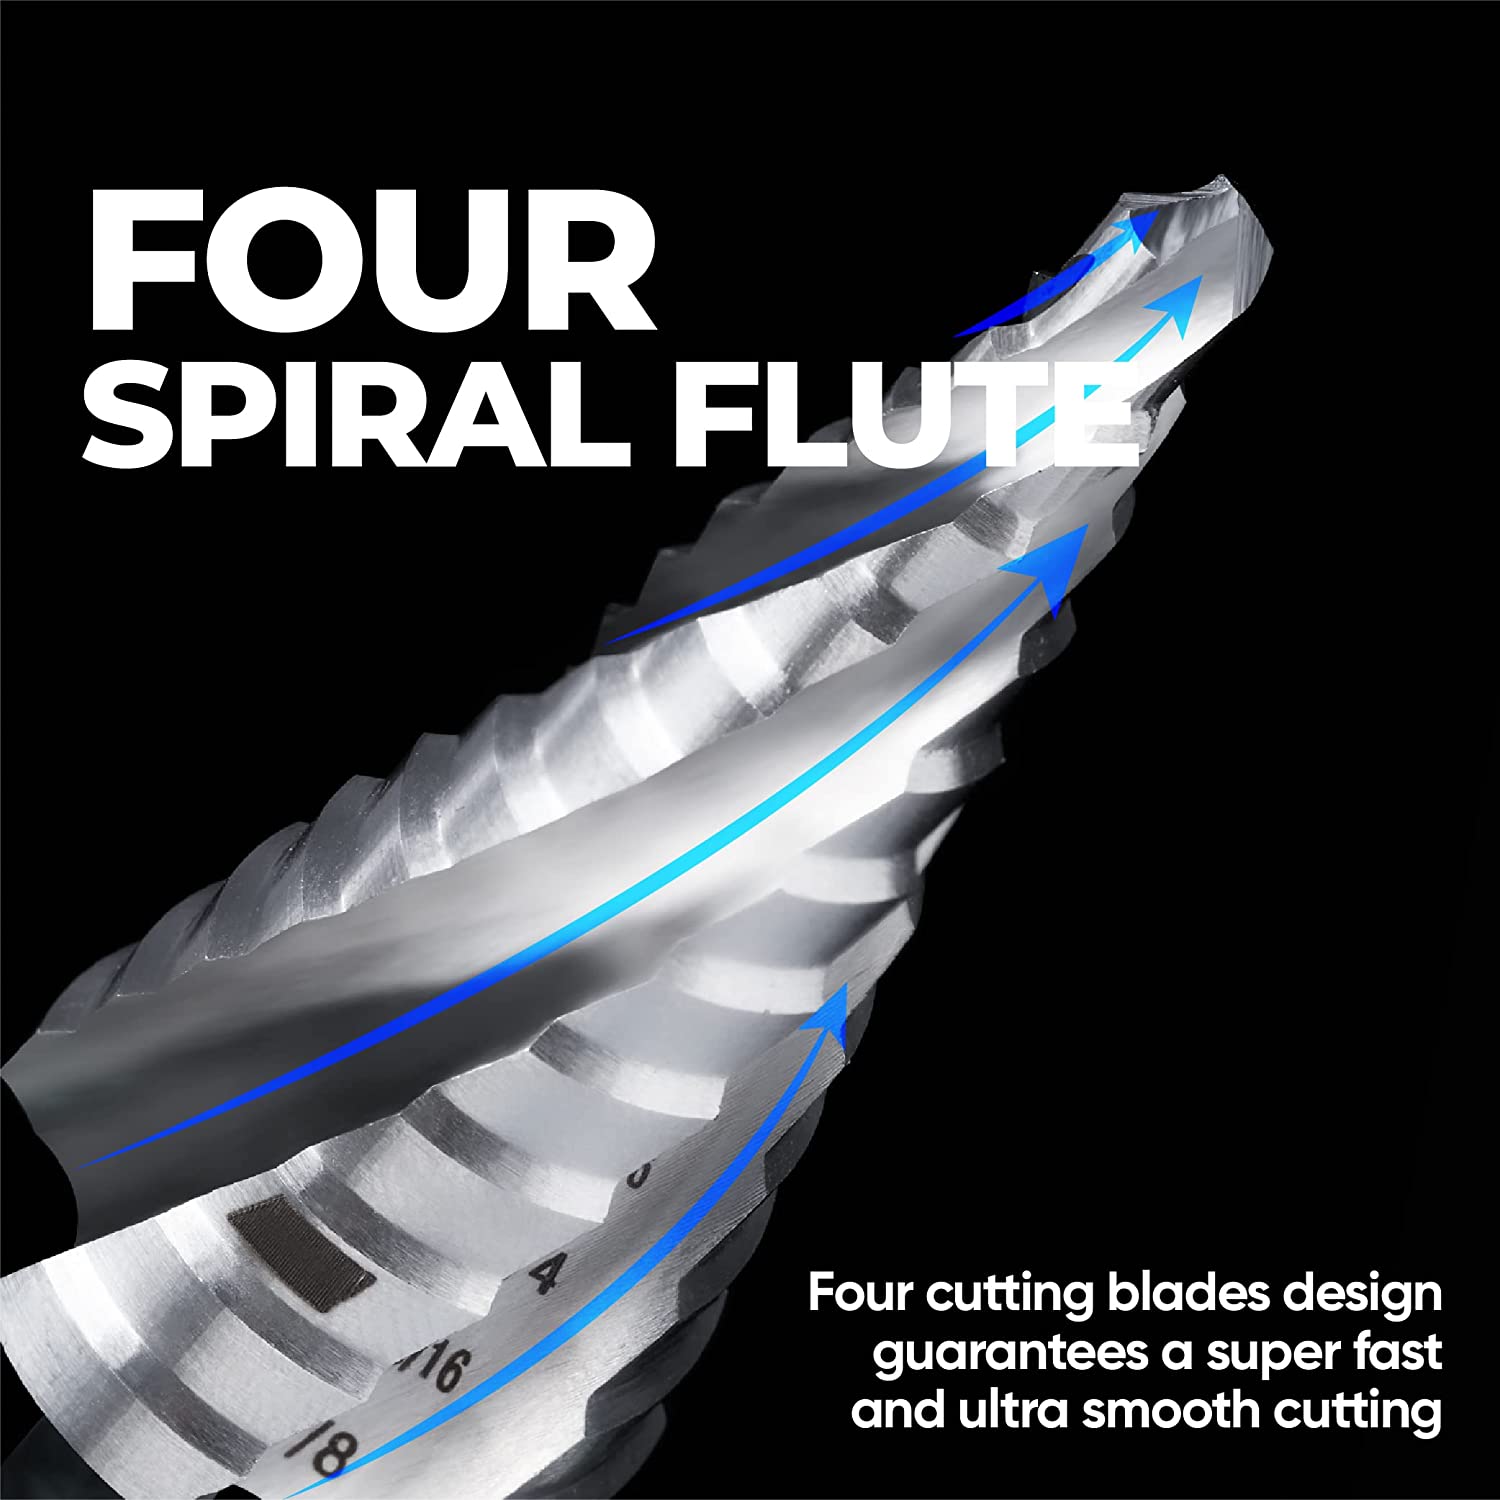 Unique four spiral flute for faster drilling and ultra smooth